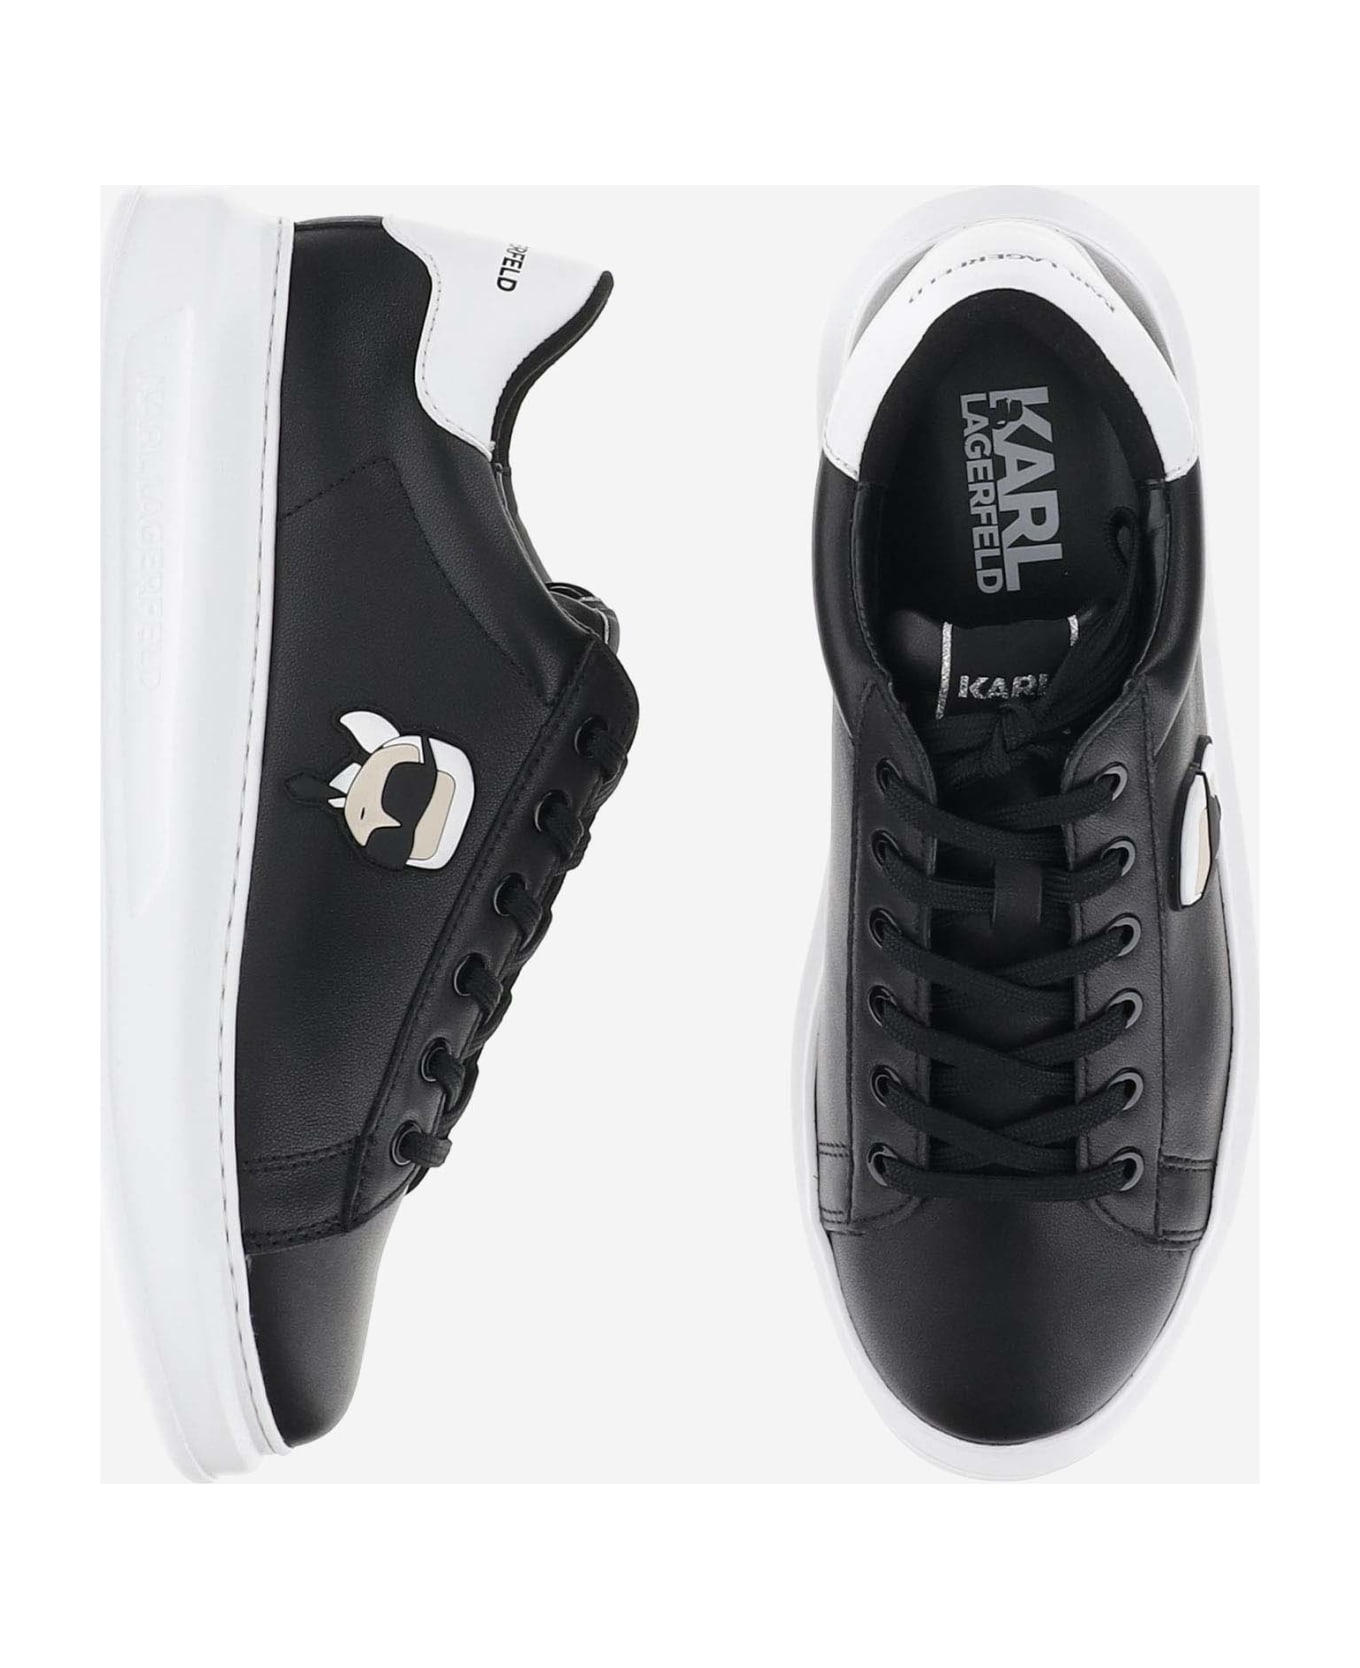 Karl Lagerfeld Leather Sneakers With Logo - Black スニーカー